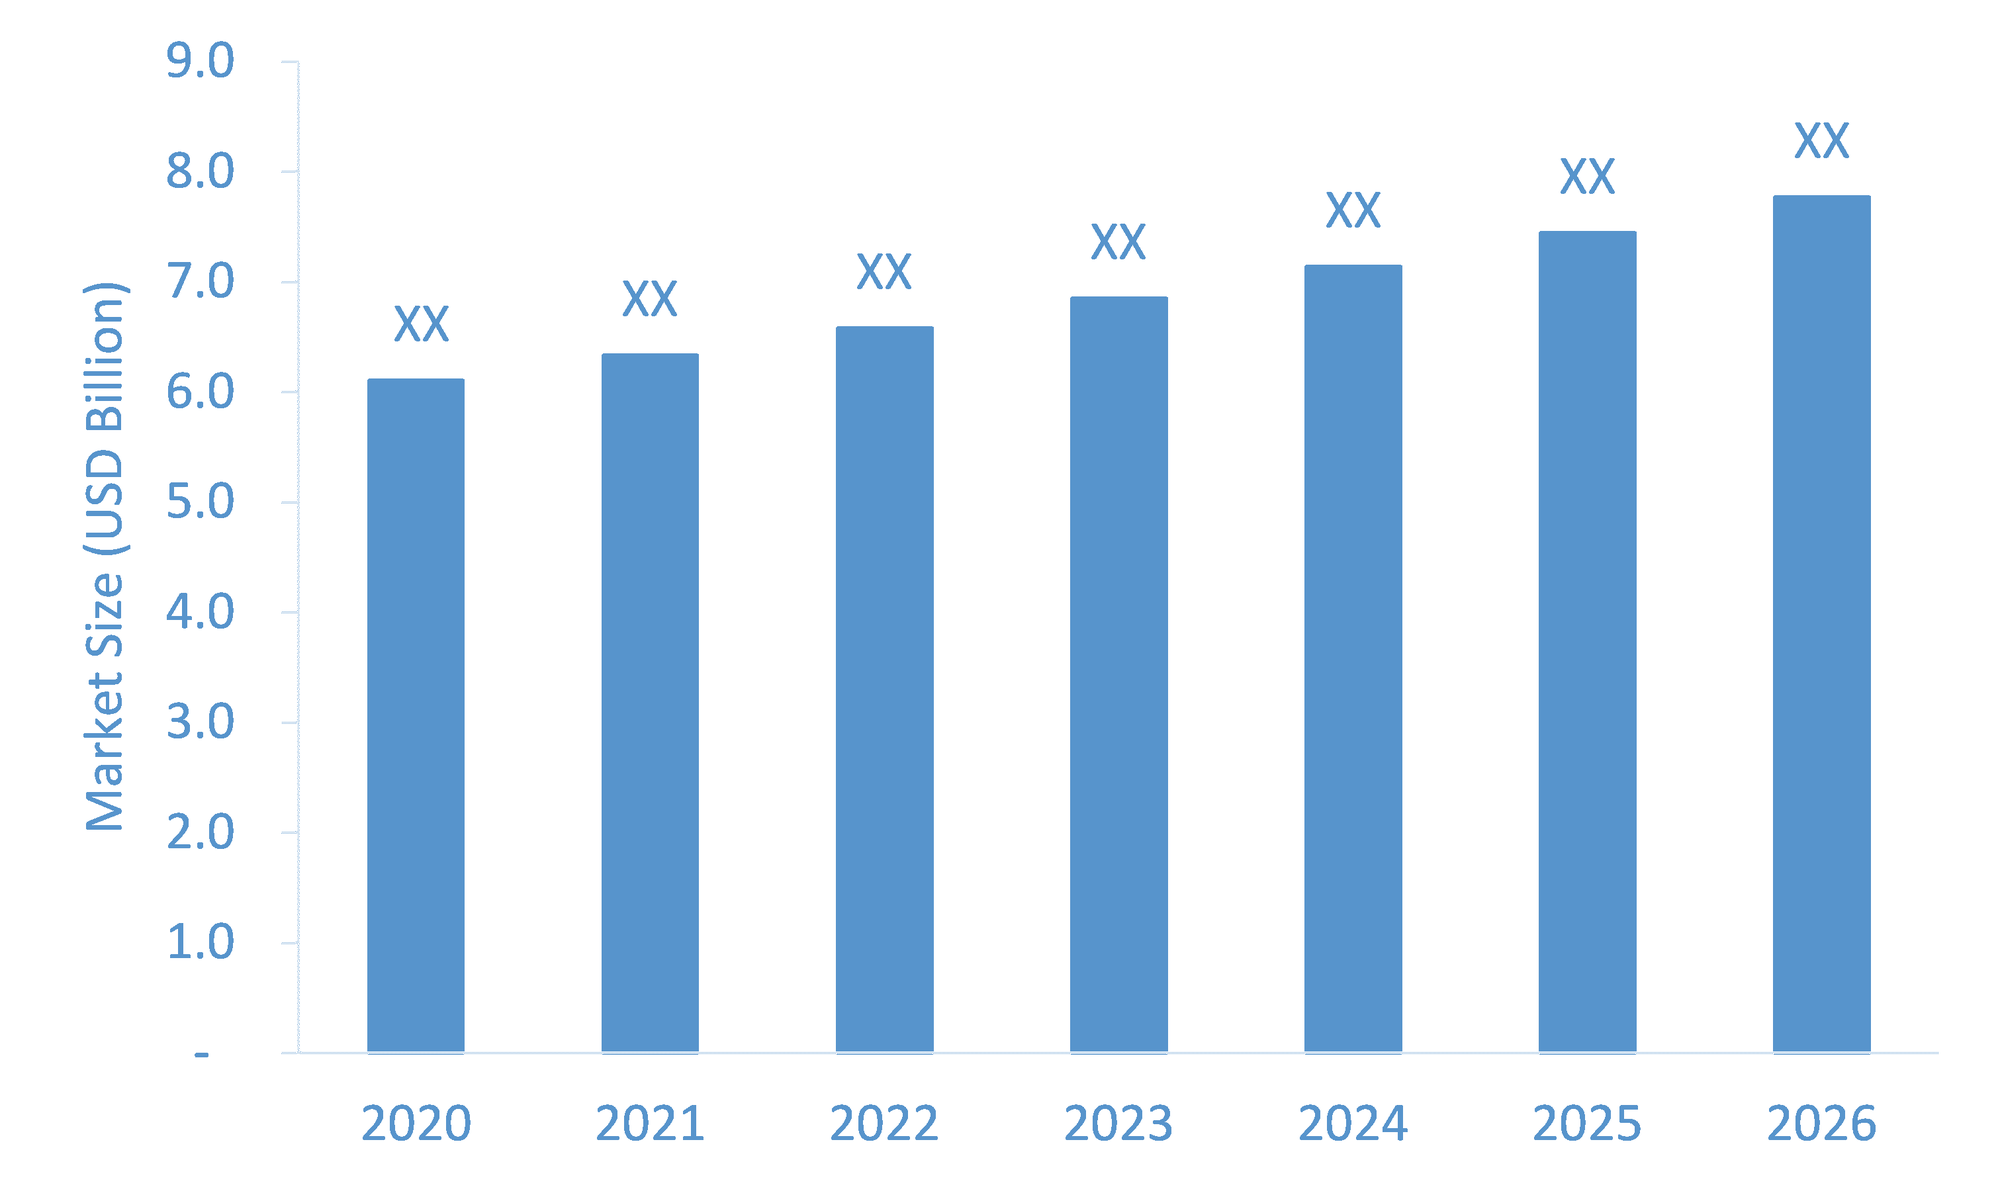 Thermostatic Water Heater Market Expected to Grow Strong Through 2026